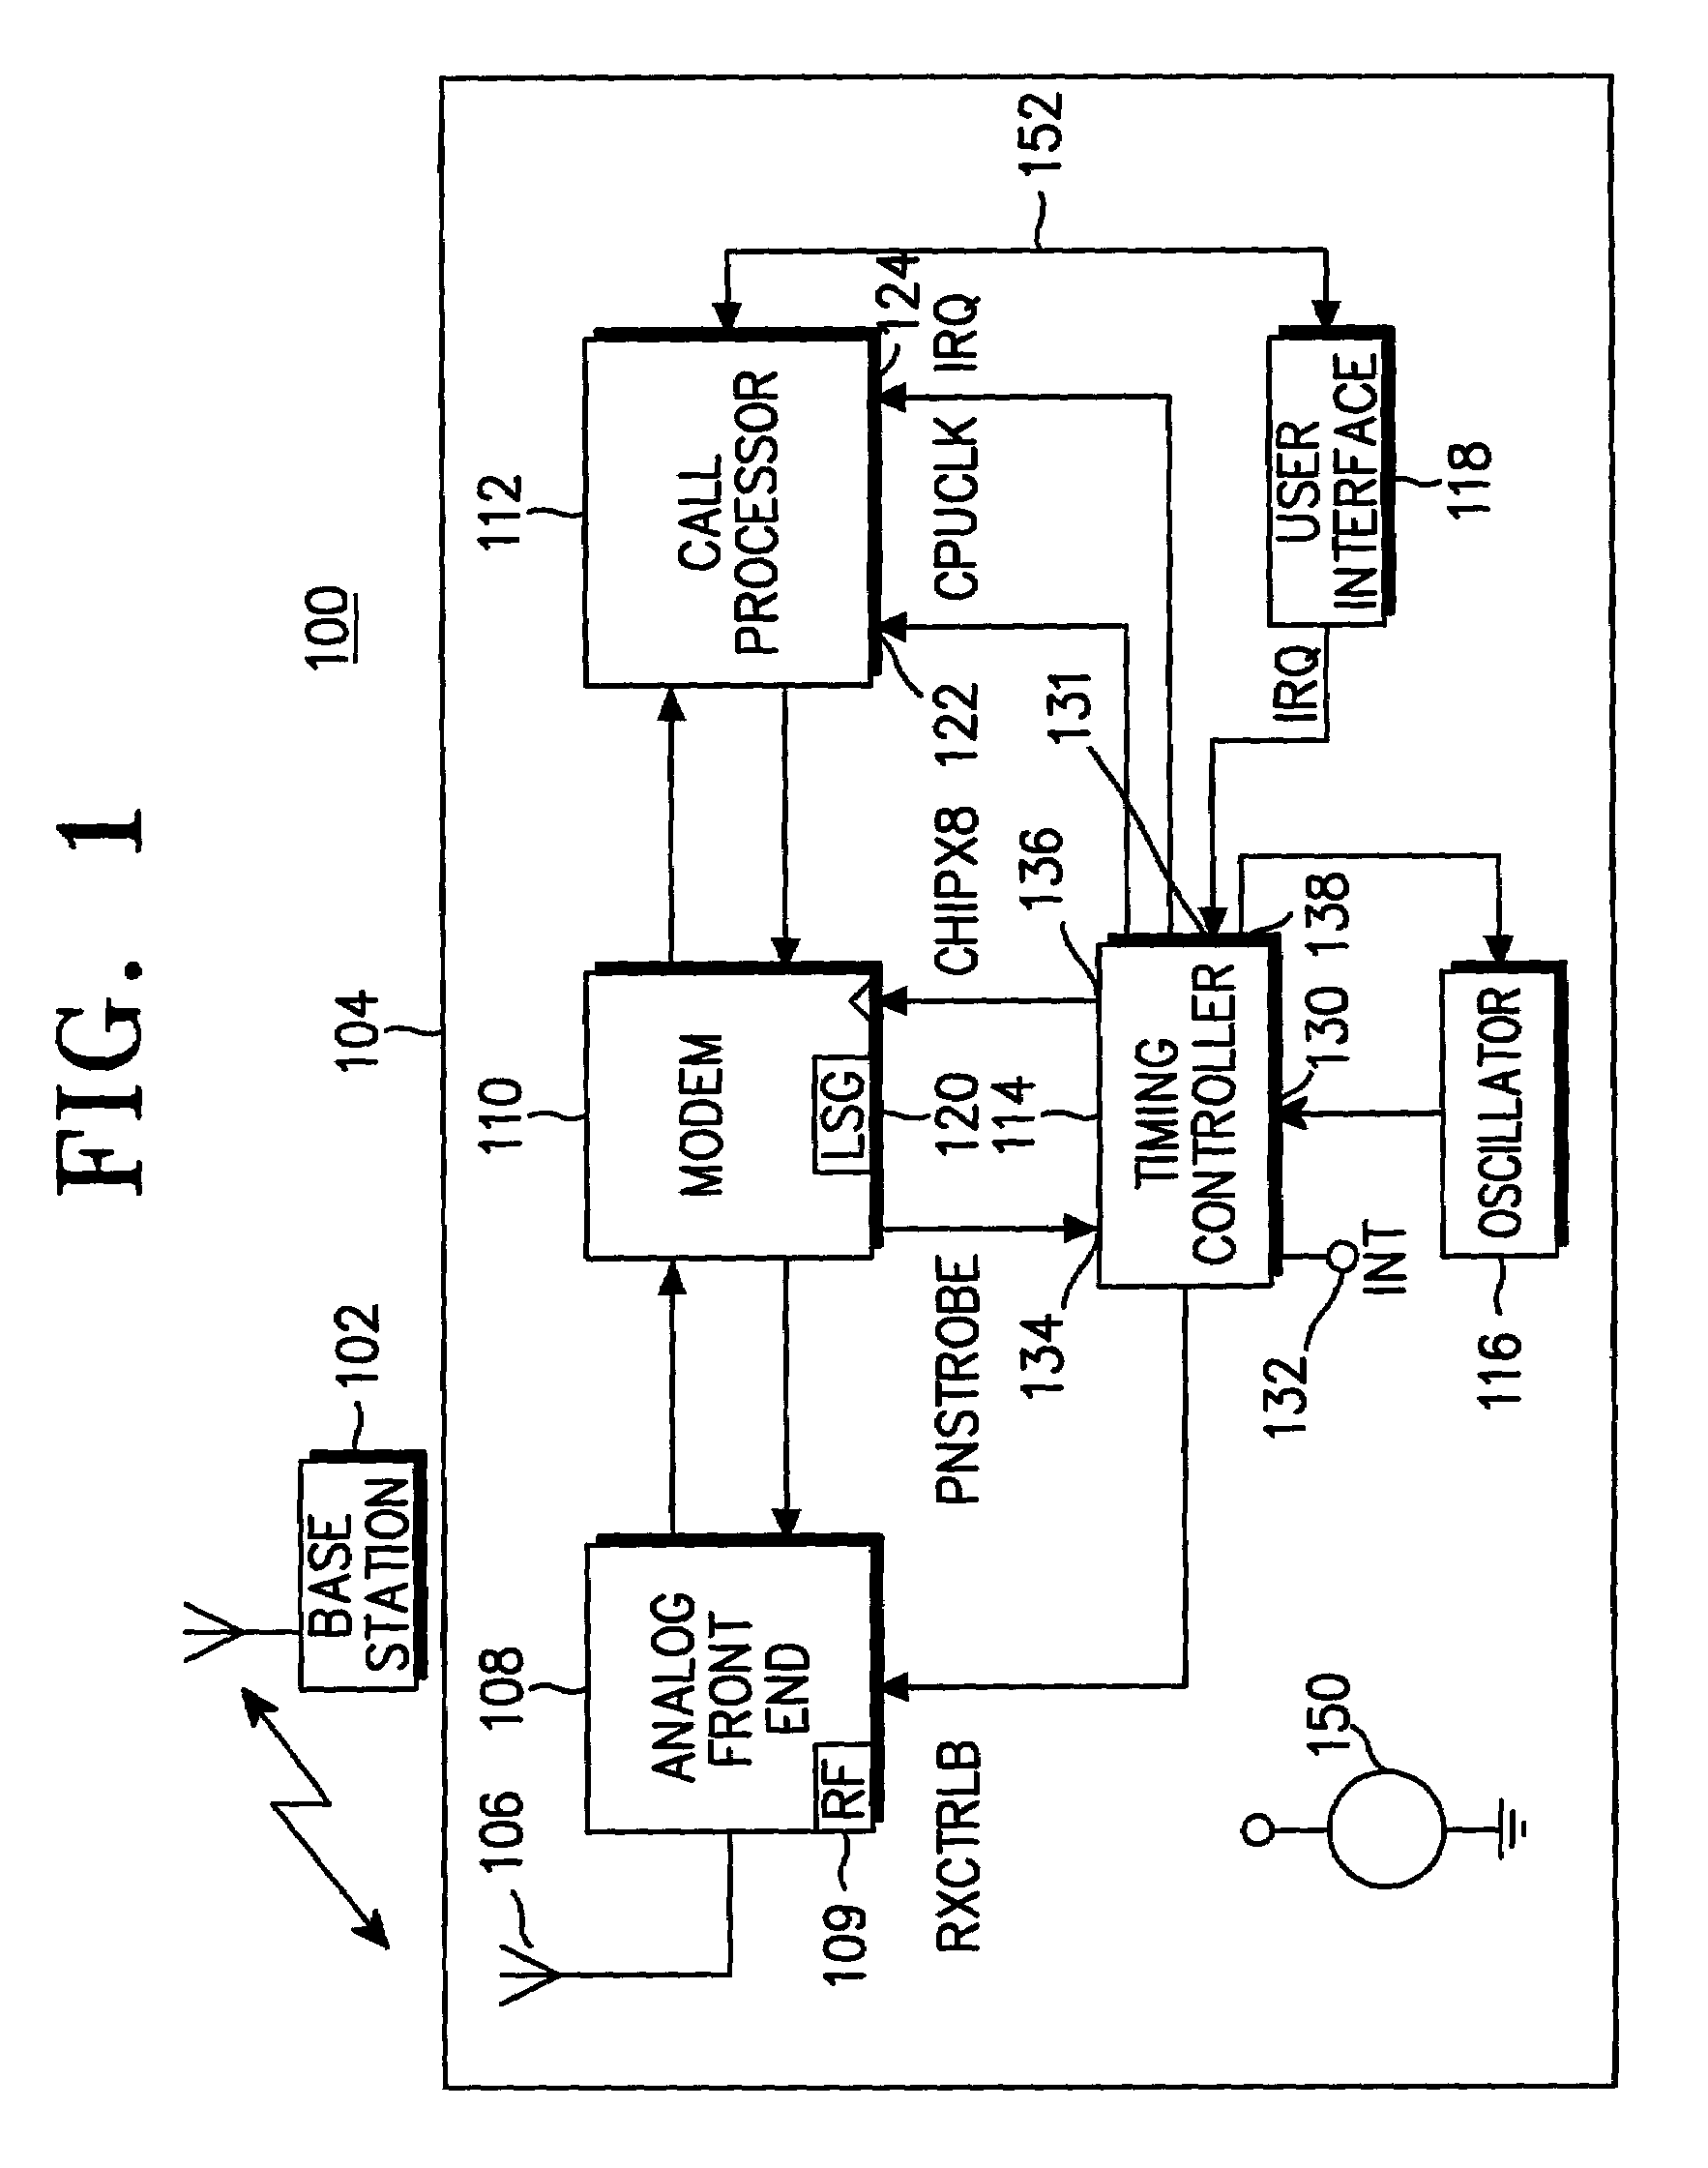 Adaptive method for reducing power consumption in a standby mode of a digital radio communication system